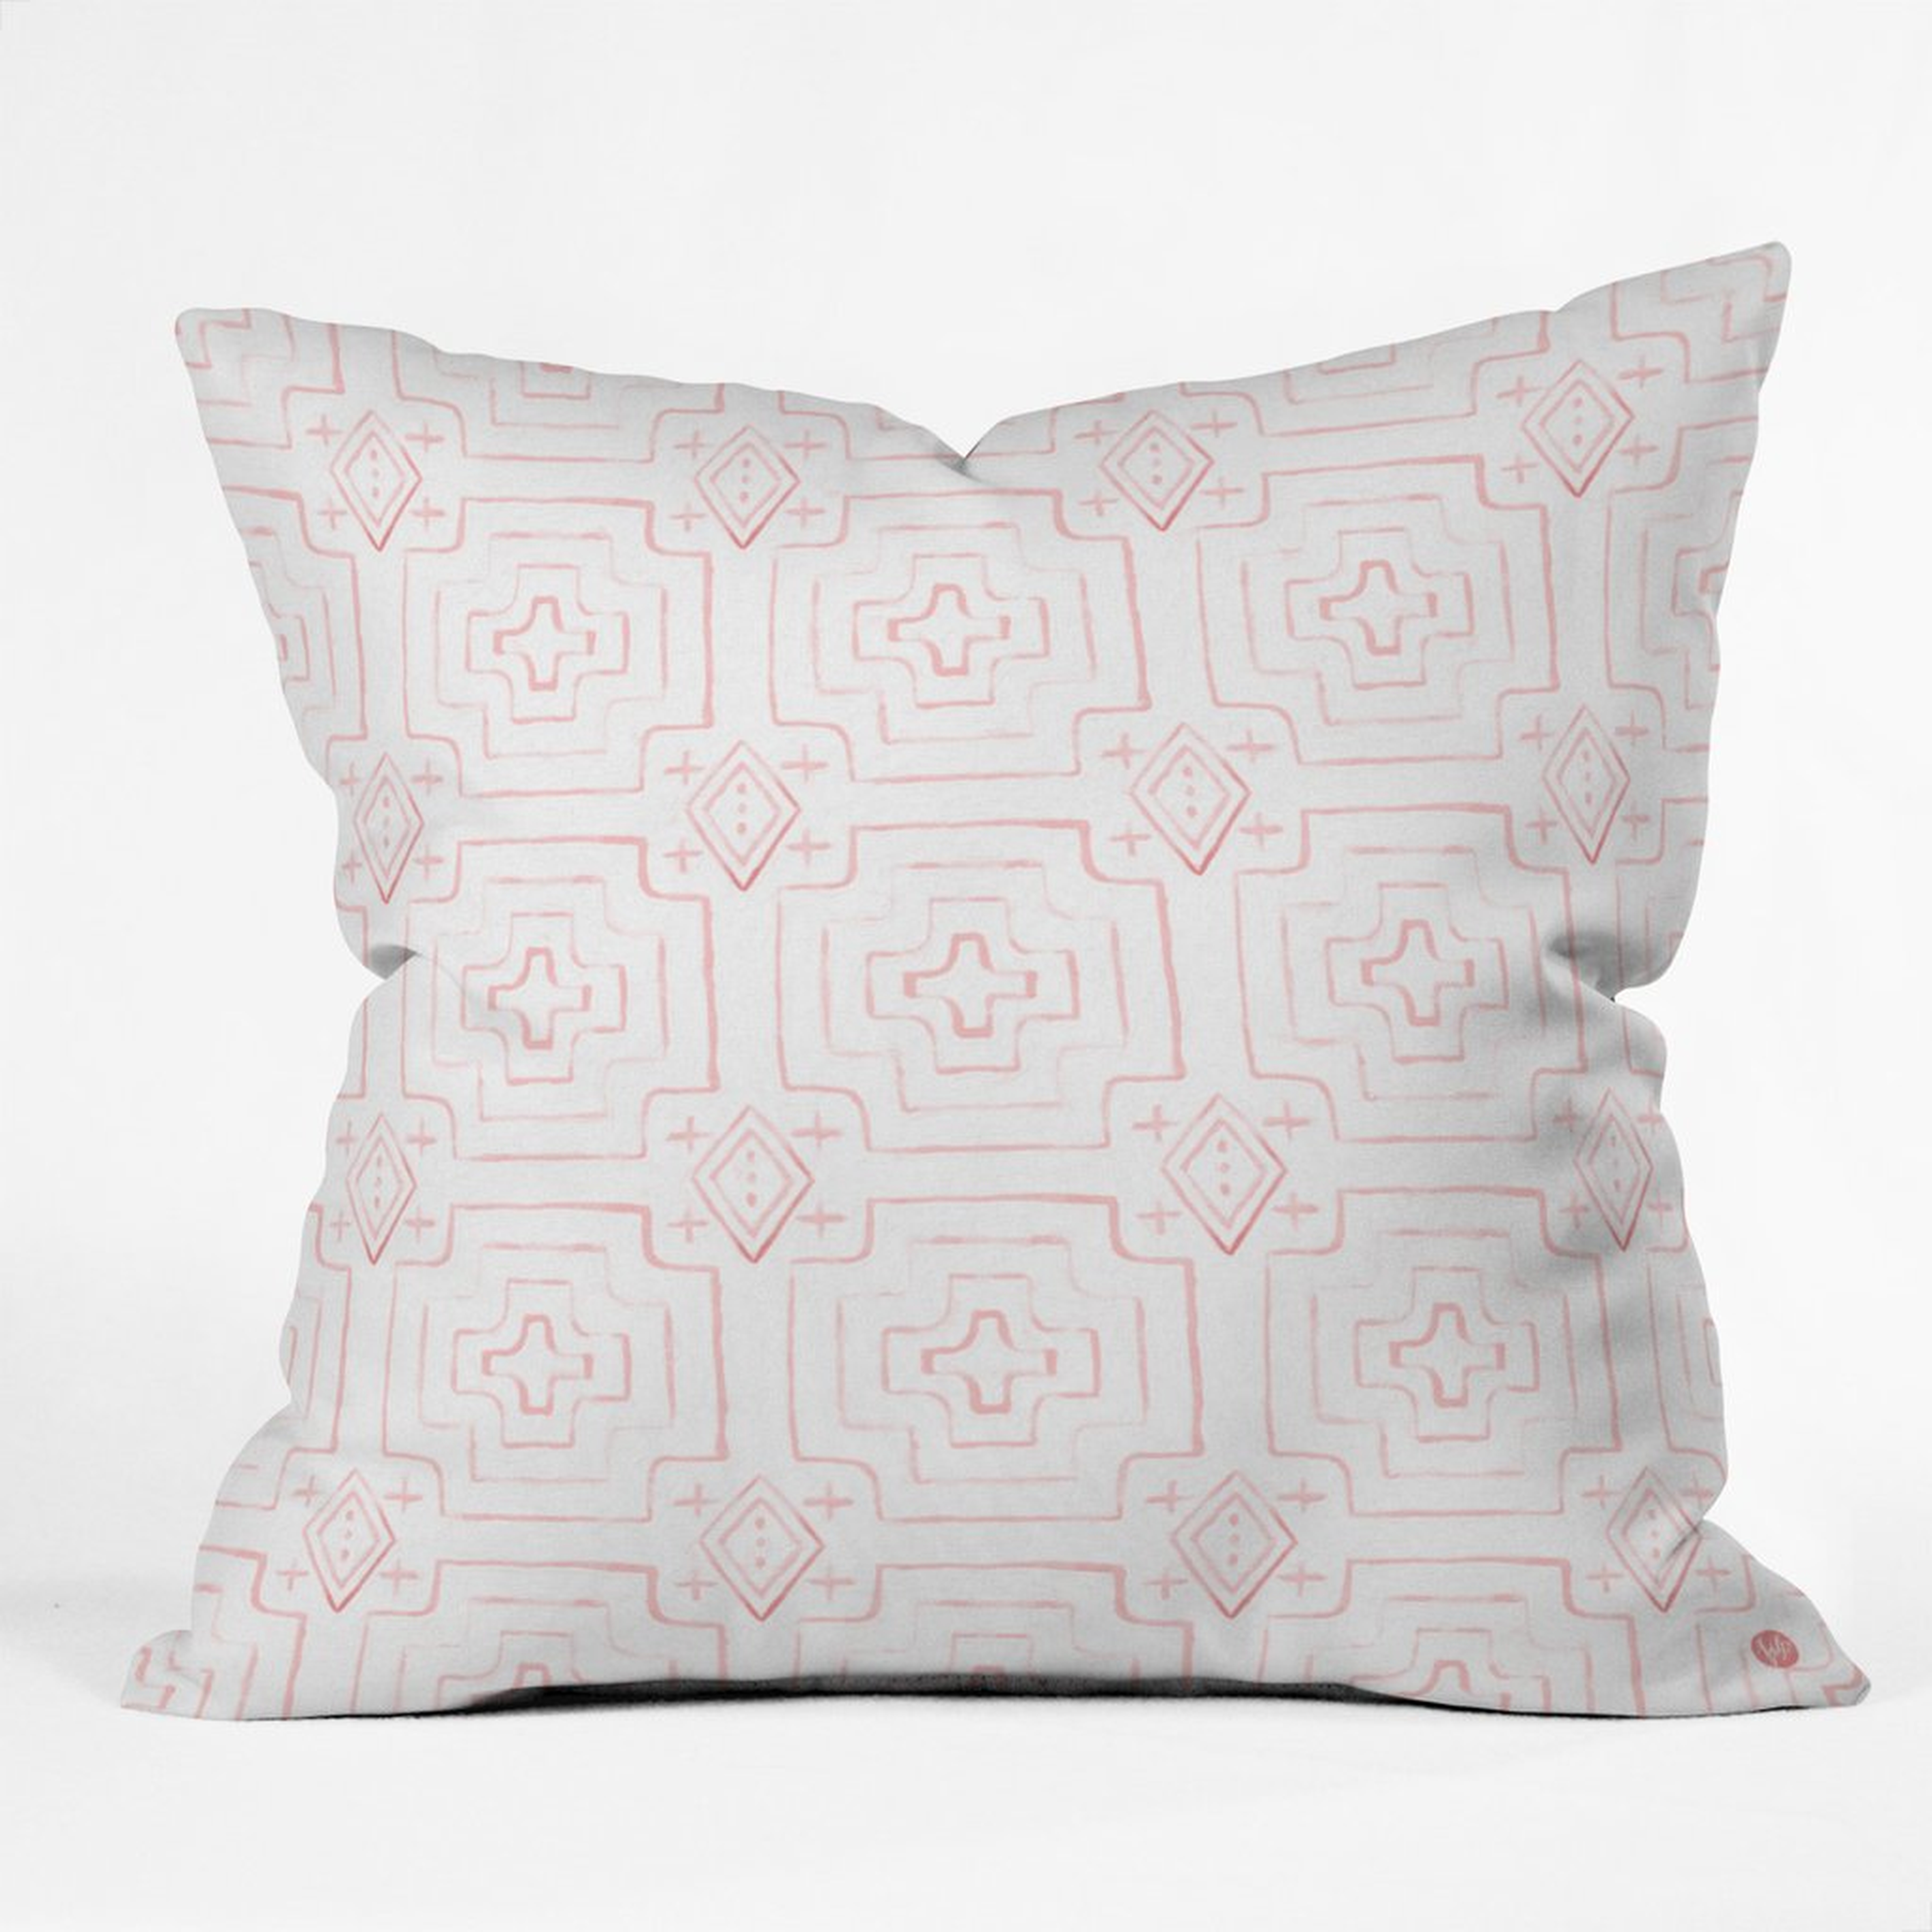 MOROCCAN MOOD ROSE Throw Pillow - 20" x 20" - Polyester insert - Wander Print Co.